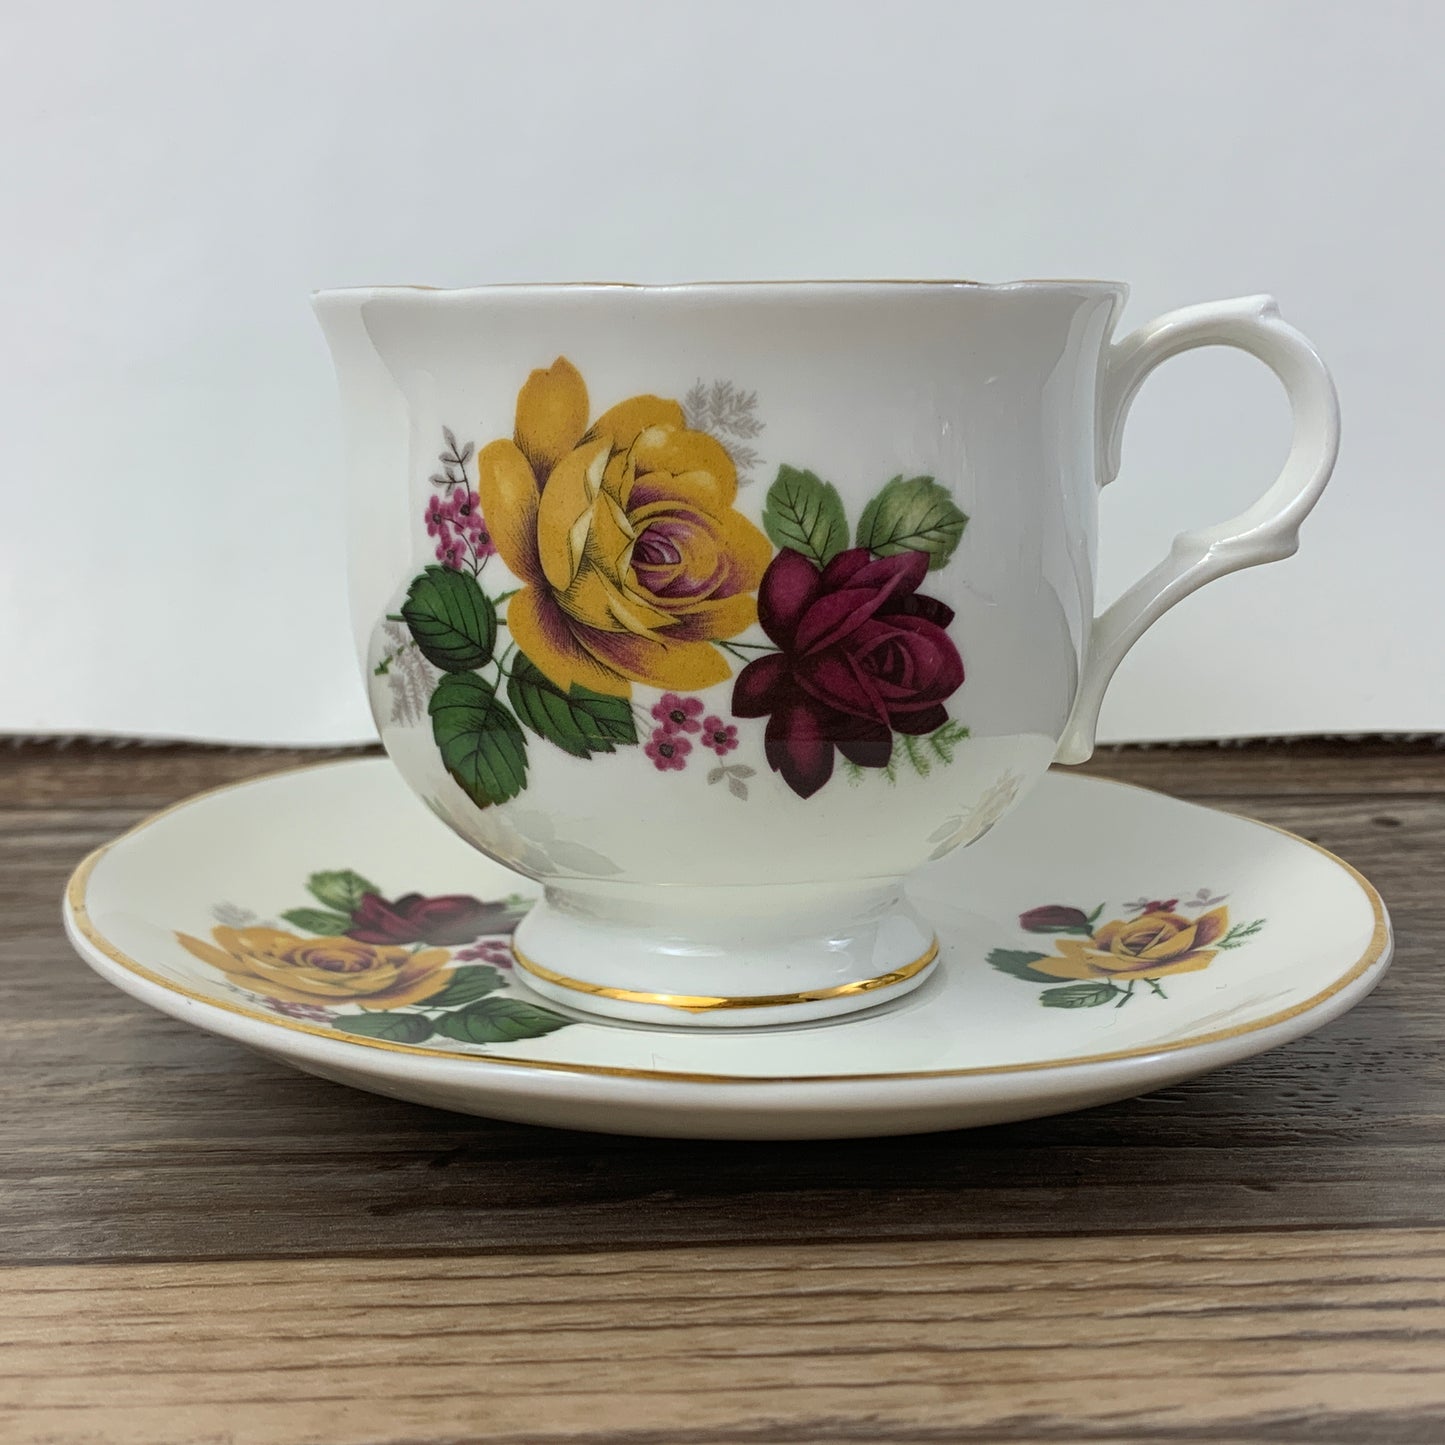 Yellow and Red Floral Pattern Vintage Teacup Sadler Wellington Fine Bone China Teacup with Tea Roses